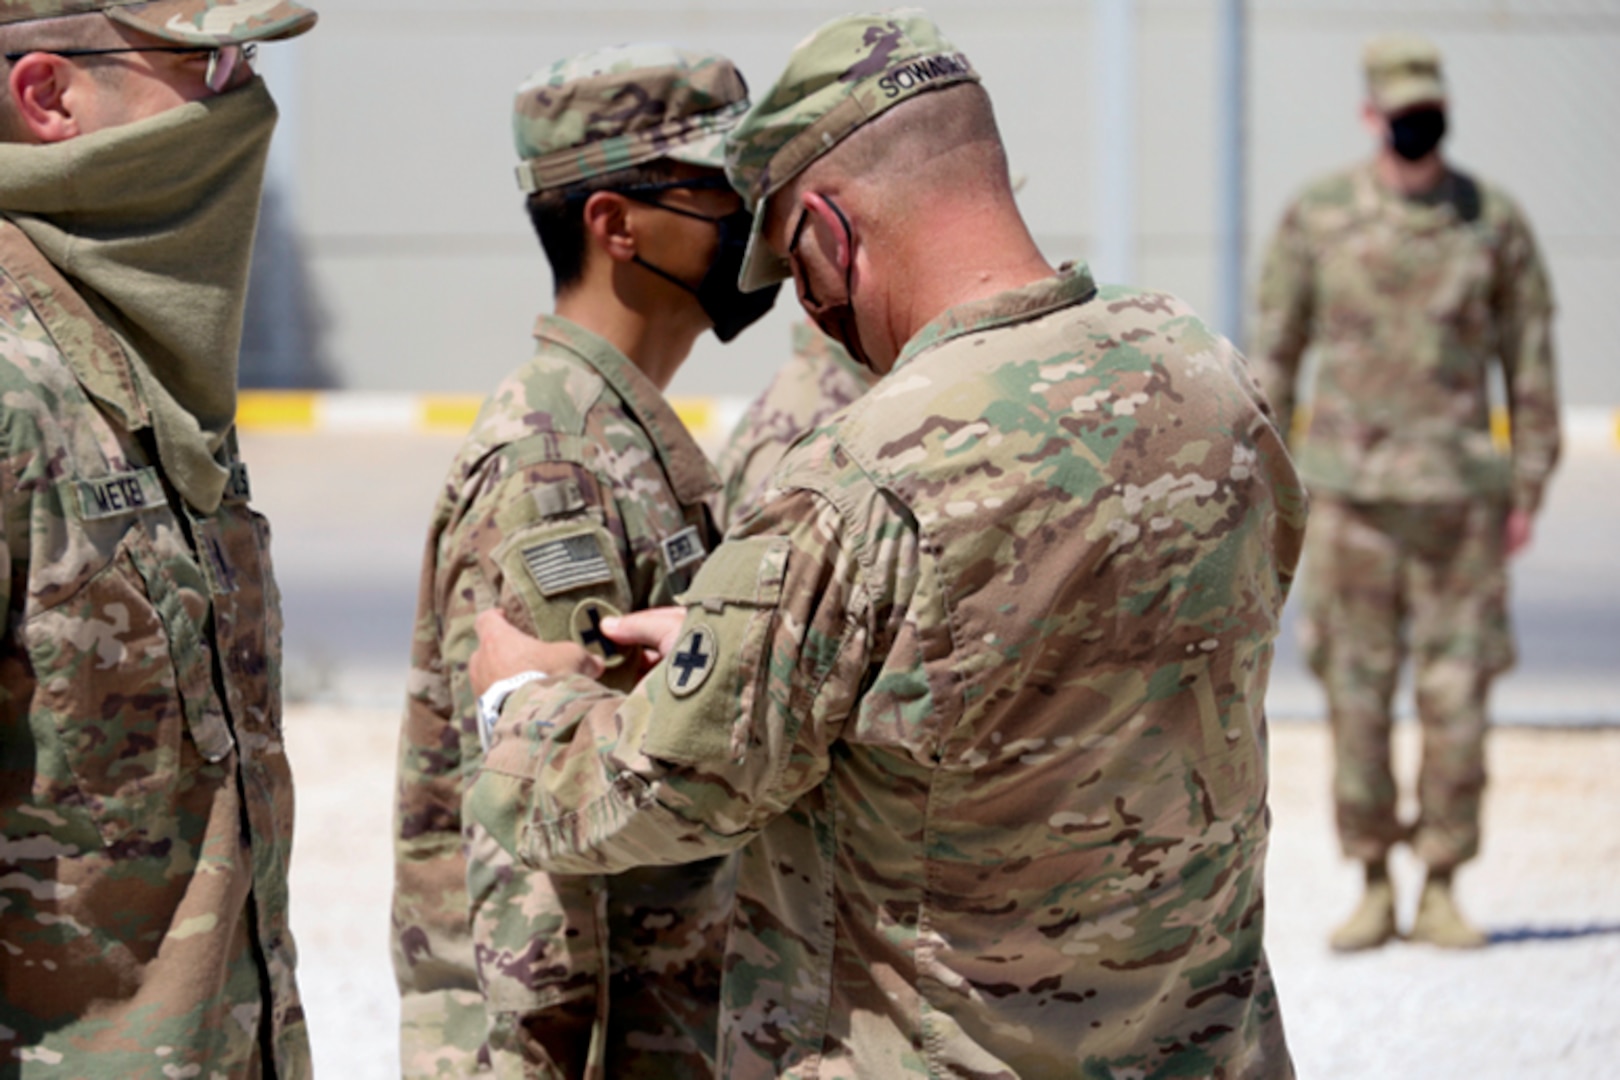 Command Sgt. Maj. Jeffery Sowash, of Springfield, Missouri, 2nd Battalion, 130th Infantry Regiment’s senior enlisted leader, presents 1st Lt. Mike Ferrer, of Fairview Heights, Illinois, with his combat patch which will be displayed on his right shoulder.